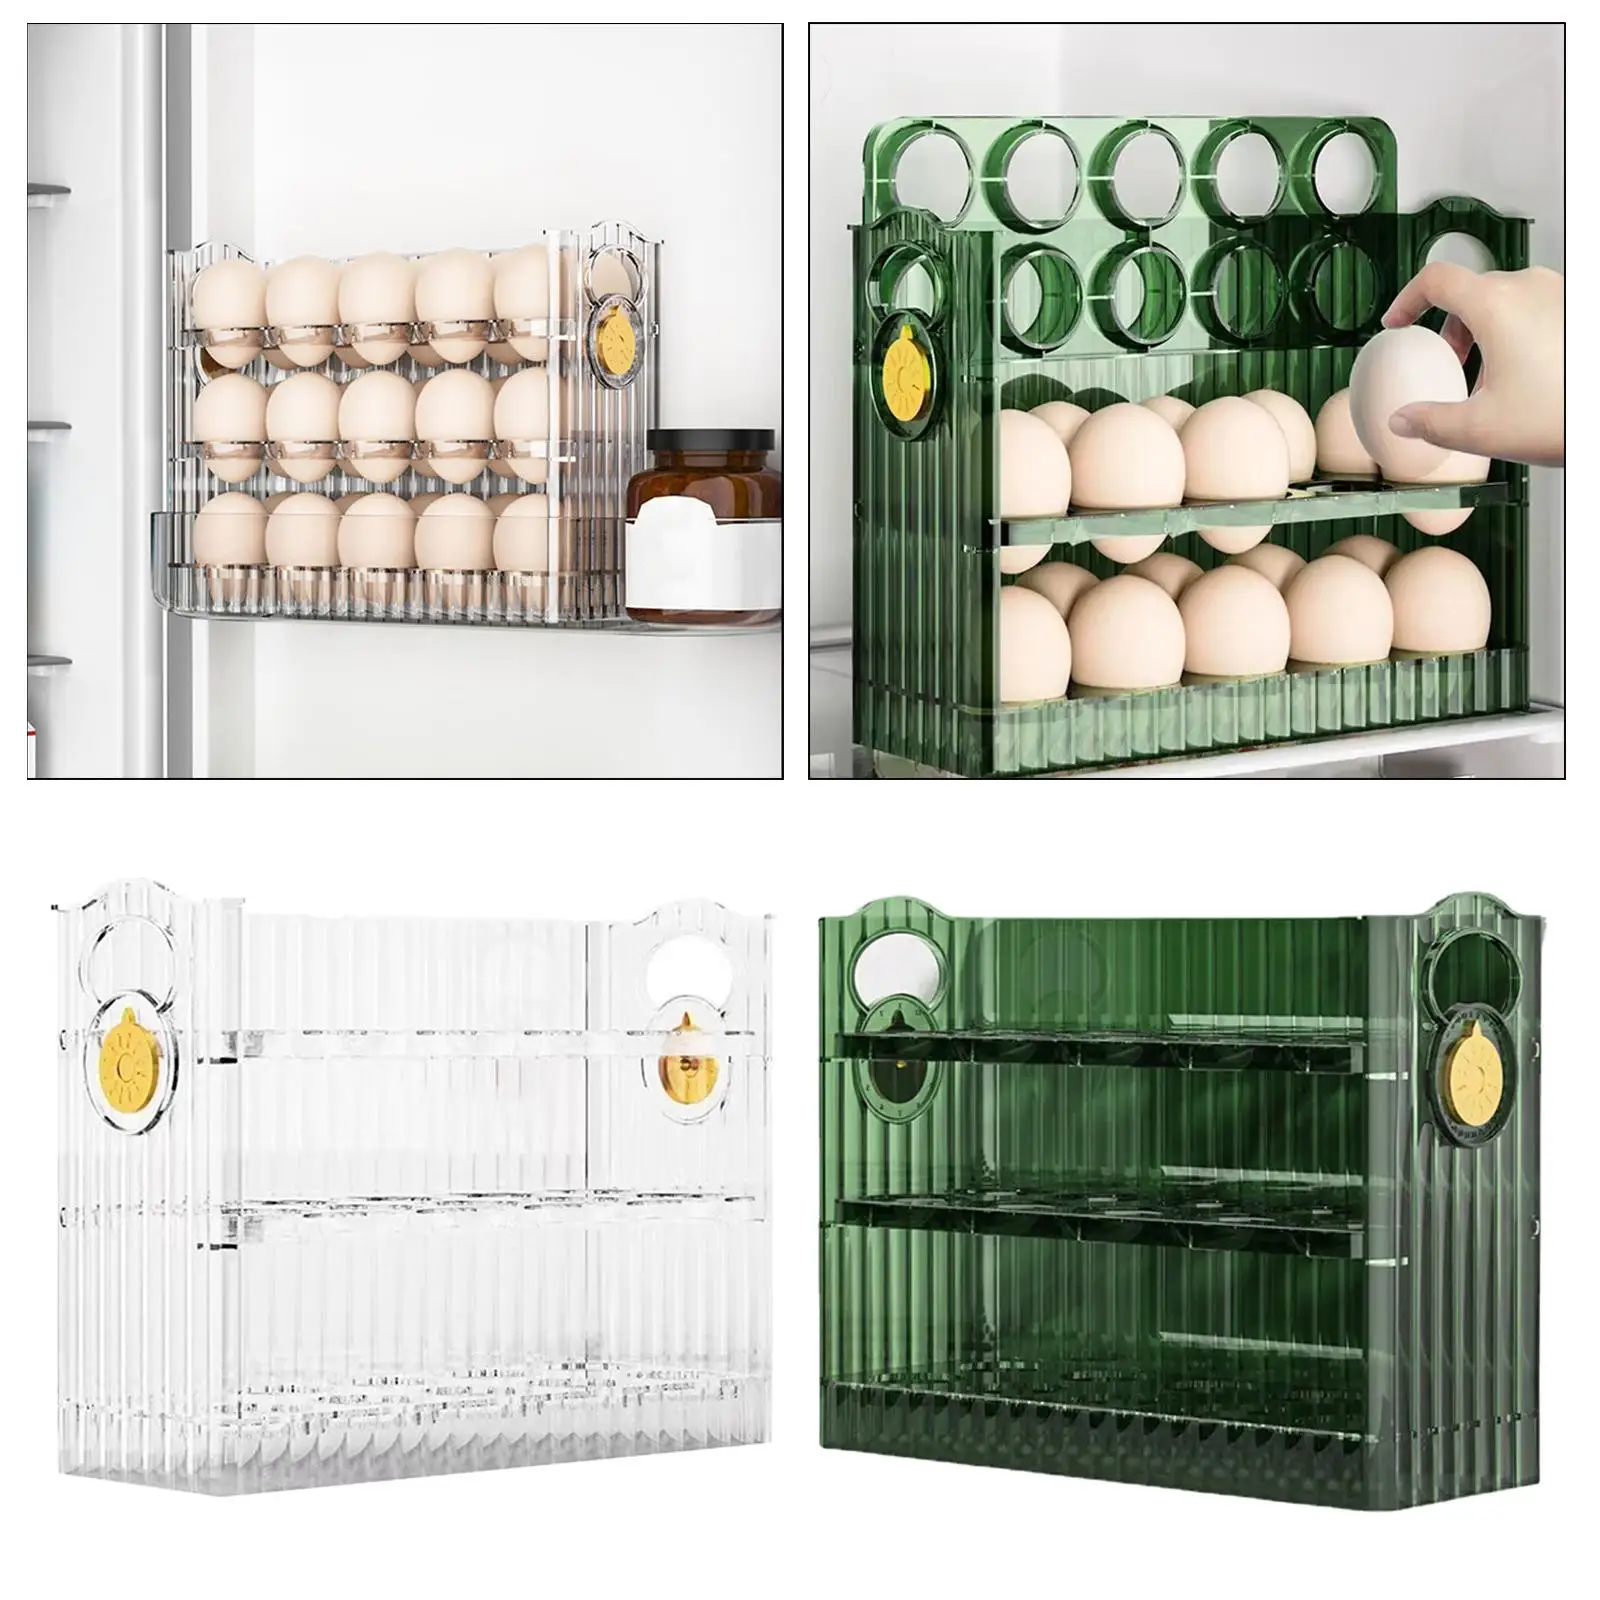 Refrigerator Egg Holder 30 Grid Egg Tray Large Capacity Multipurpose Sturdy for Countertop Table